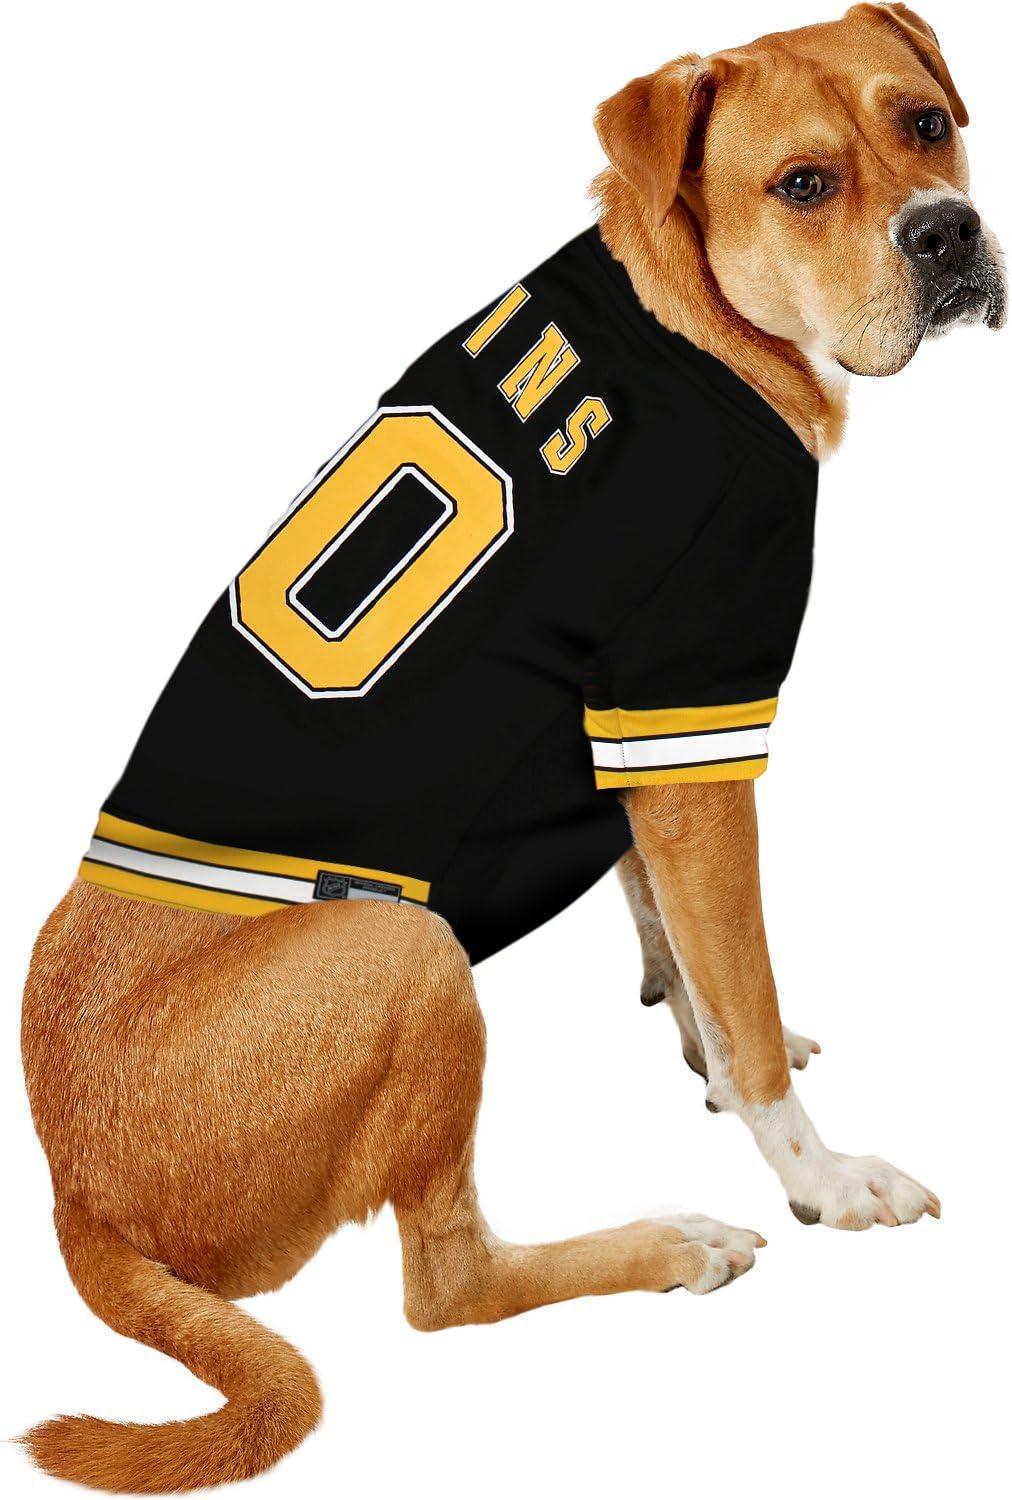 NHL Boston Bruins Jersey for Dogs & Cats, Small. - Let Your Pet Be